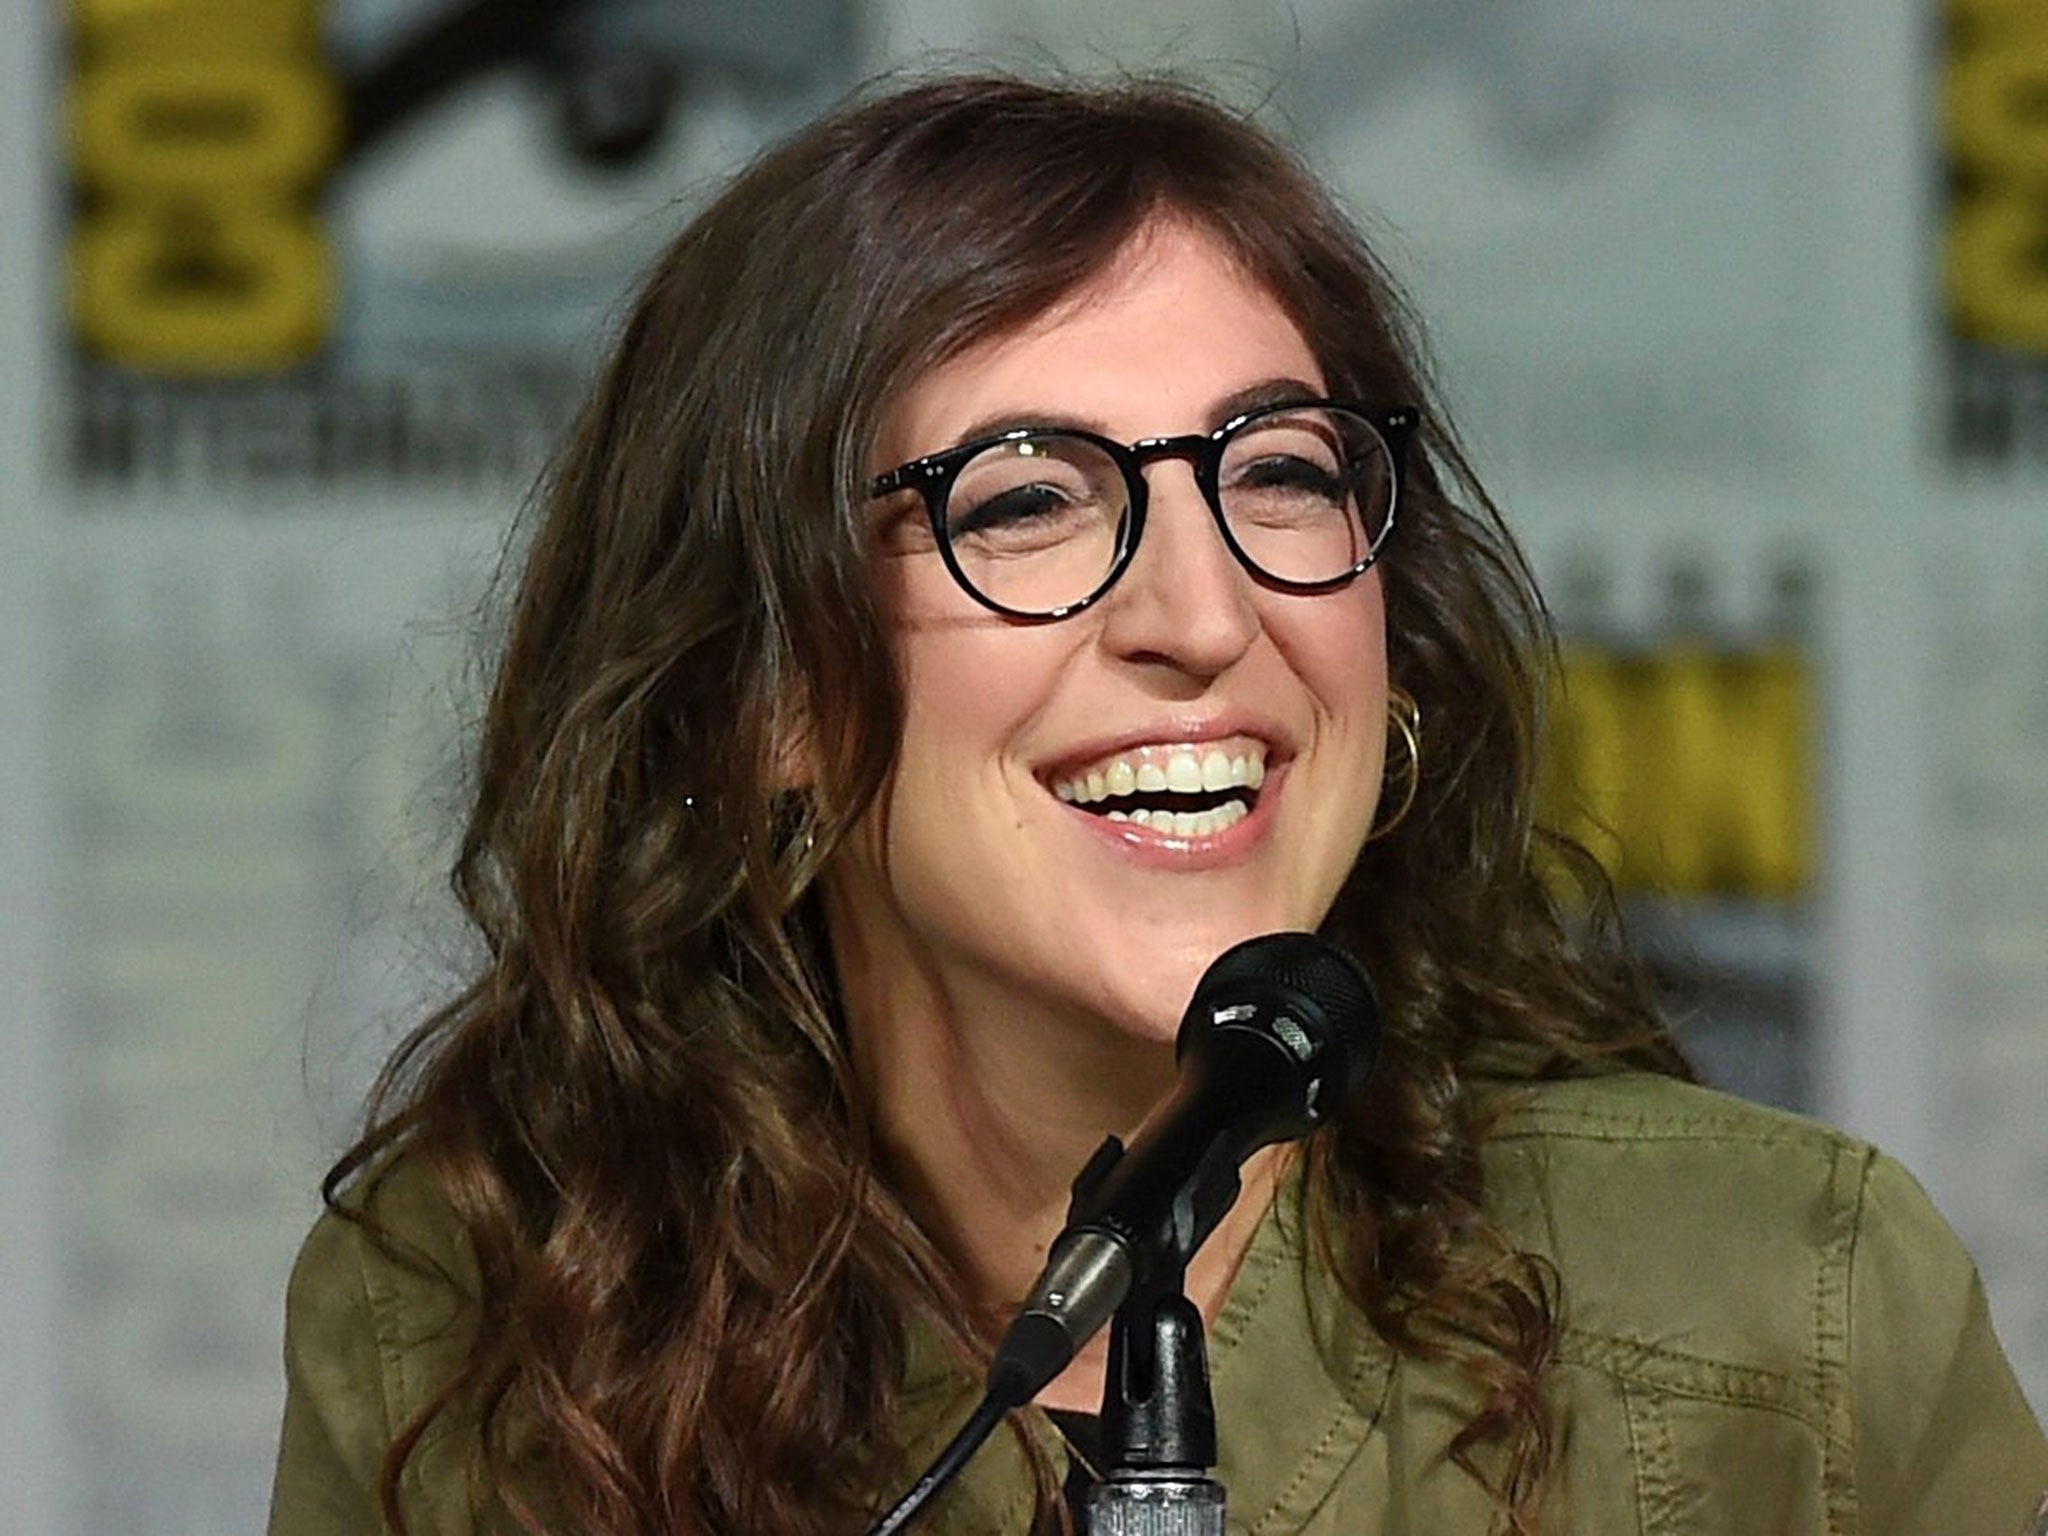 Big Bang Theory Star Mayim Bialik Almost Lost Amy Role To Future Cast